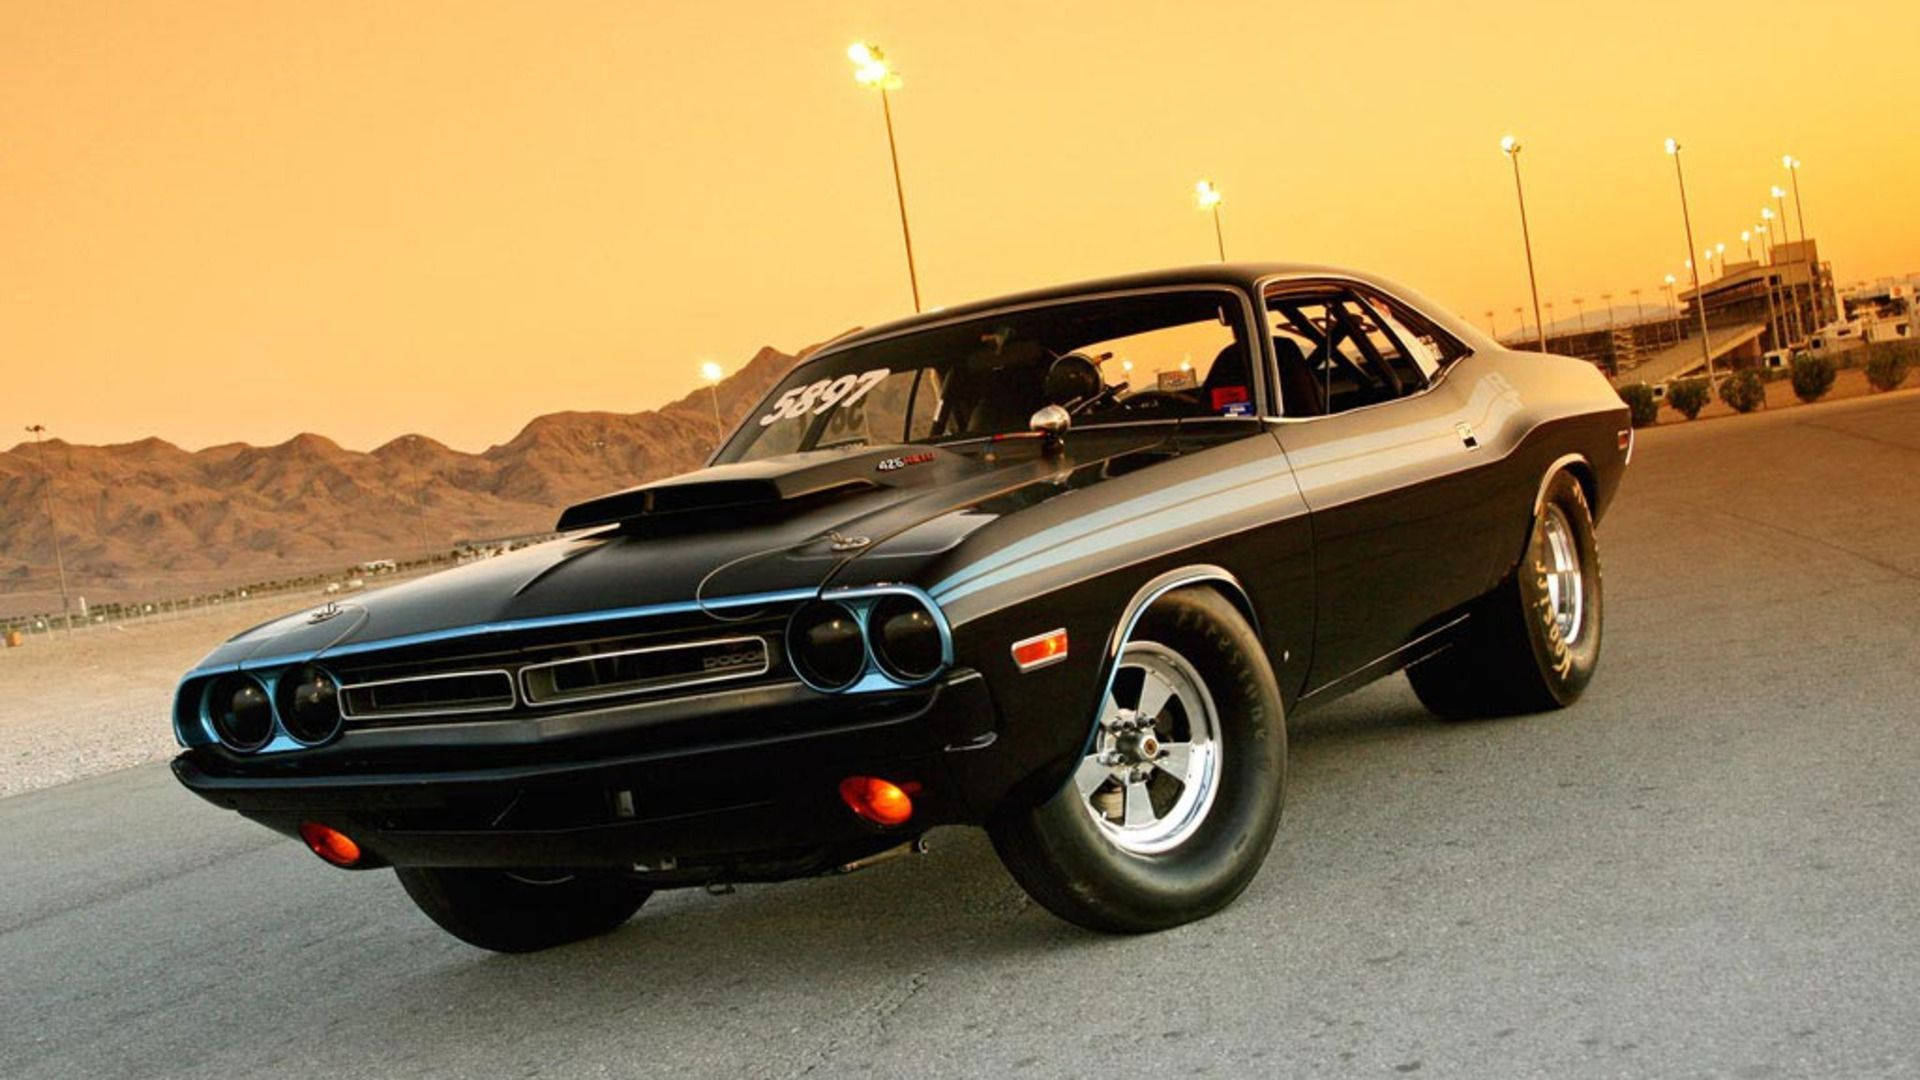 American Muscle Car In Black Paint Background